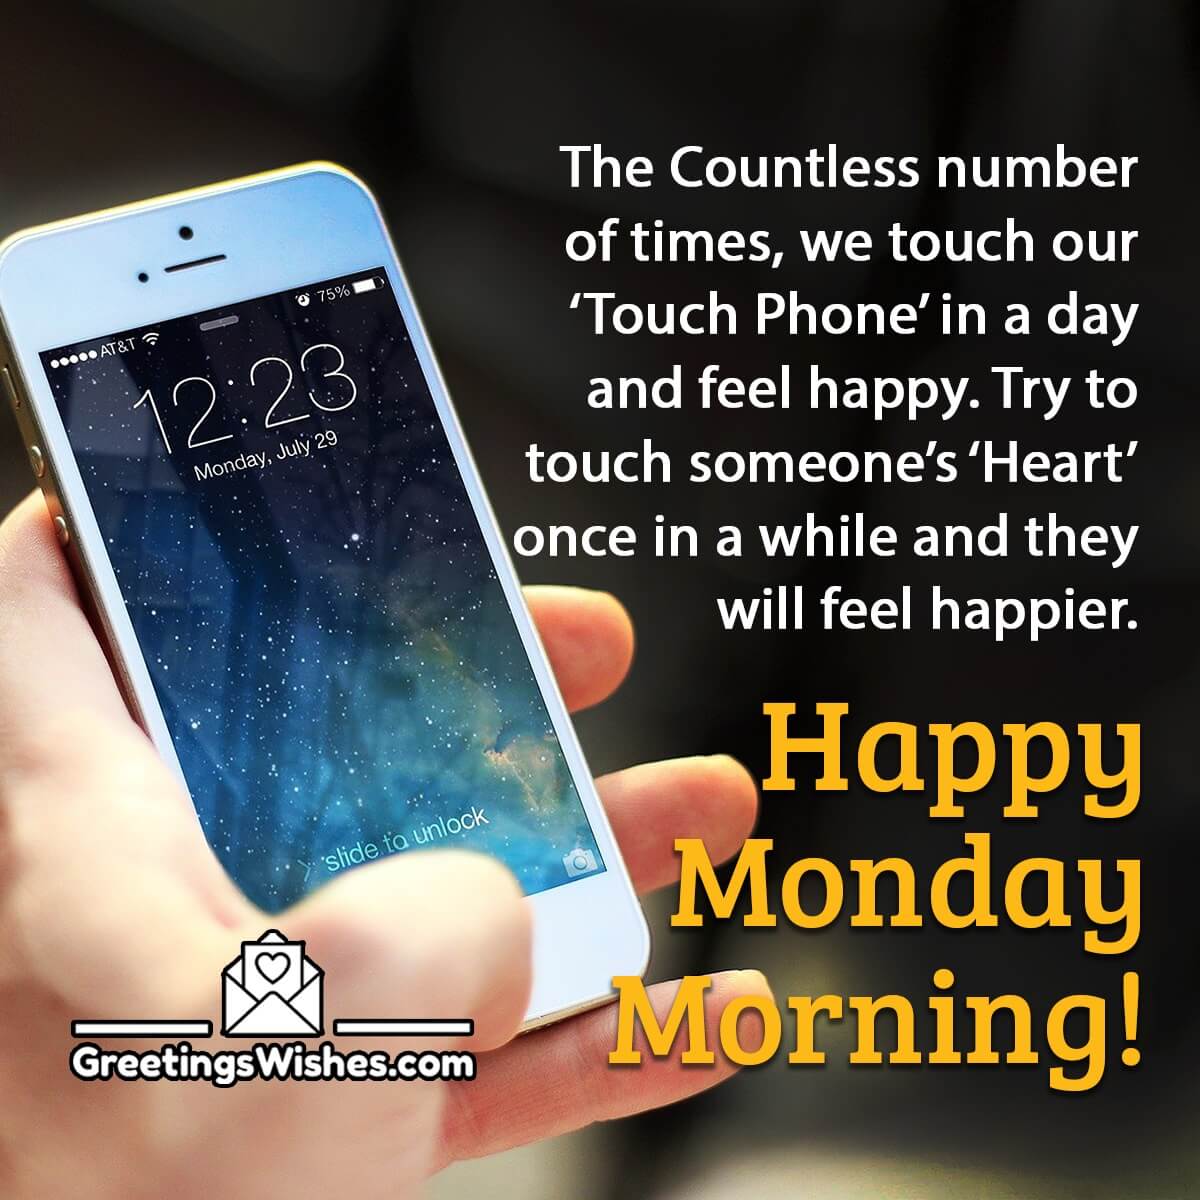 Monday Morning Wishes - Greetings Wishes